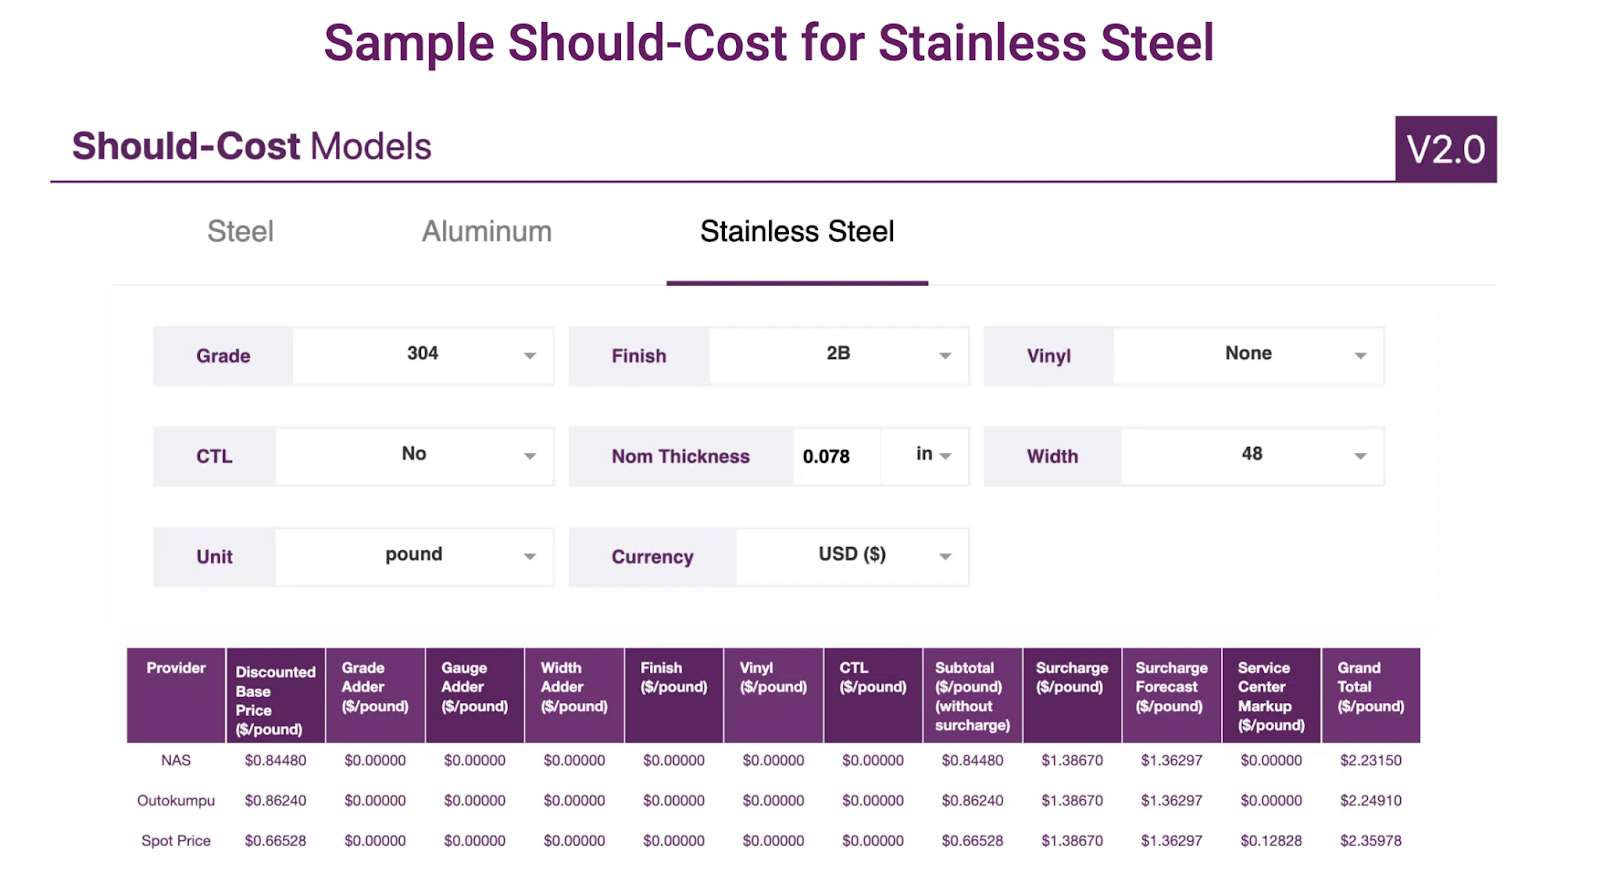 stainless should-cost model, the current nickel price